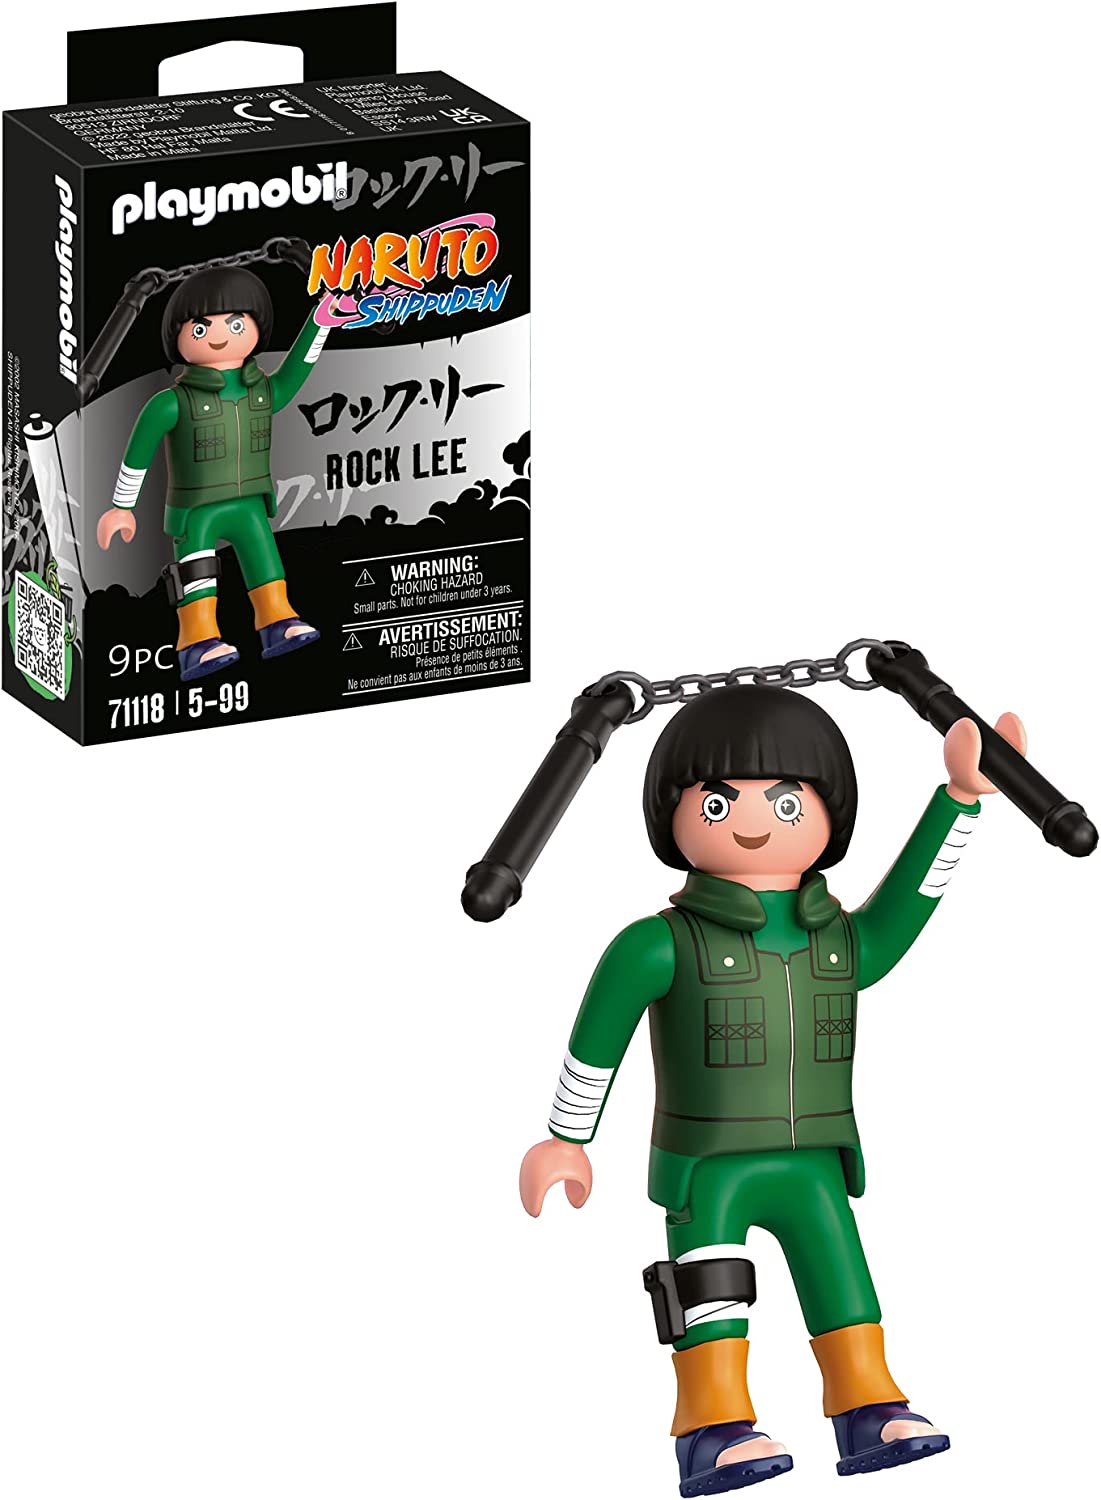 PLAYMOBIL Naruto 71118 Rock Lee with Accessories, Creative Fun for Anime Fans with Great Details and Authentic Extras, from 5 Years